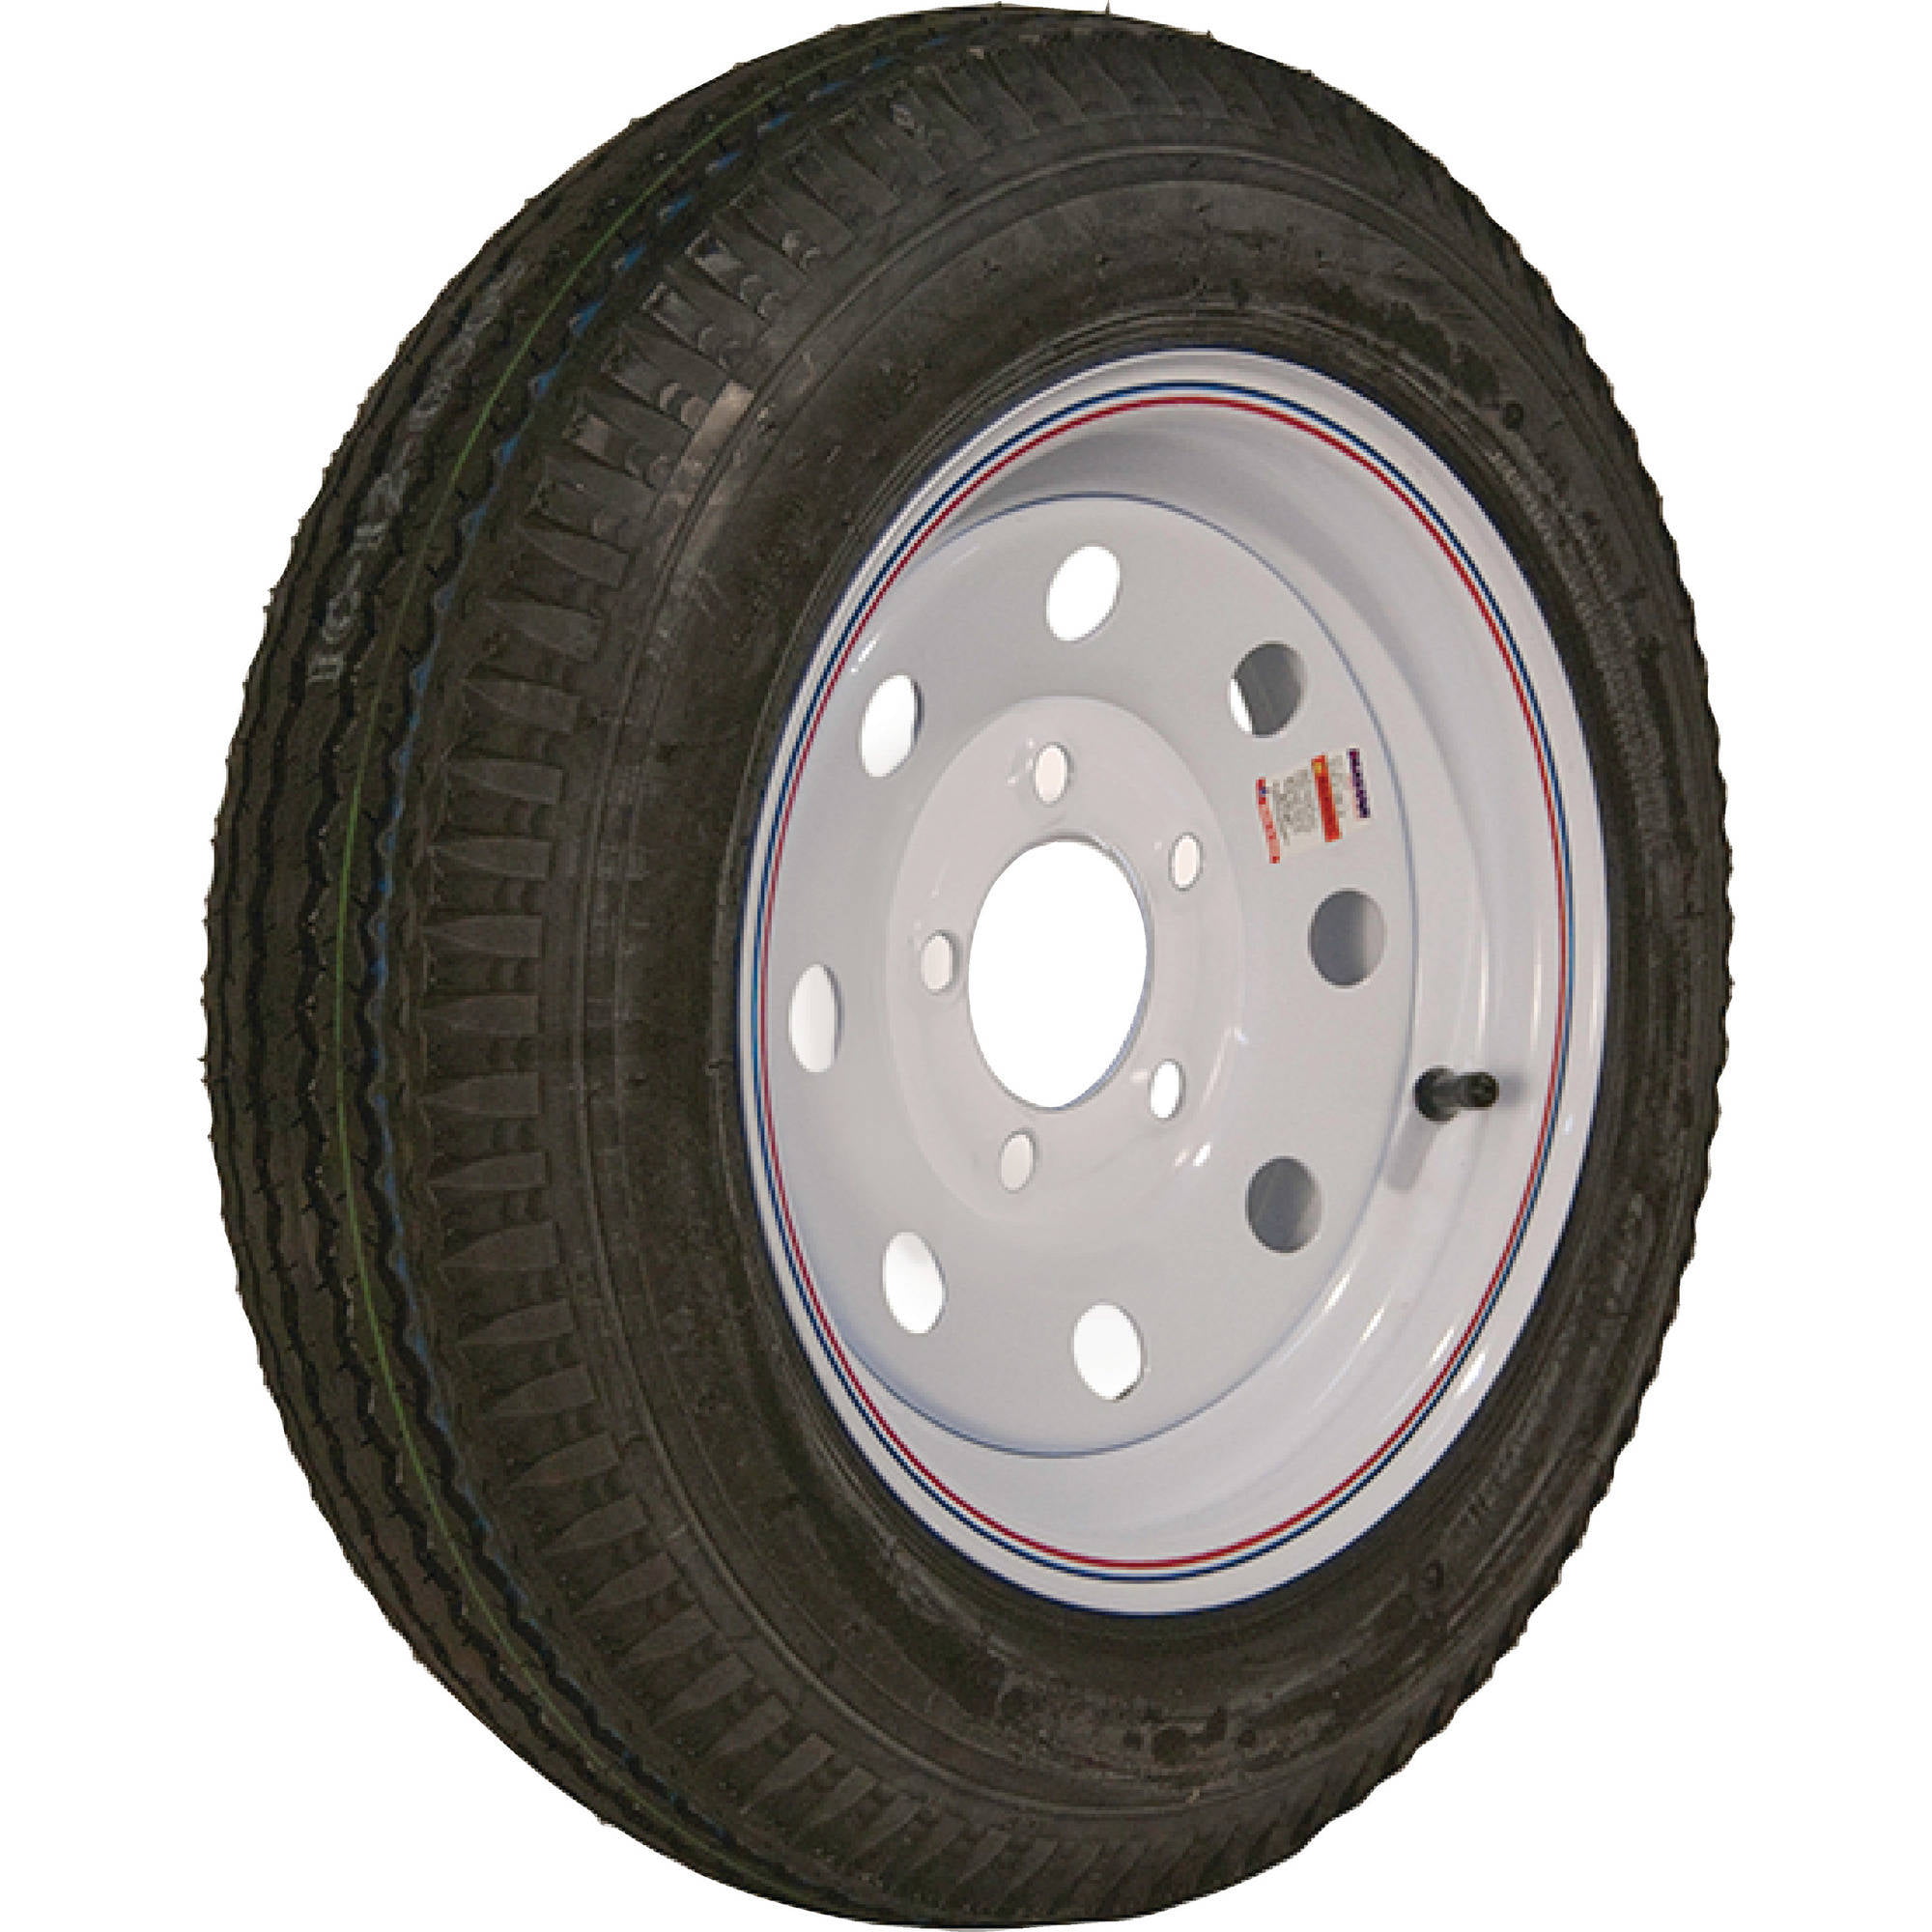 LoadStar 4-hole 12 x4 Solid White Trailer Wheel and Tire 5.30-12 6ply 